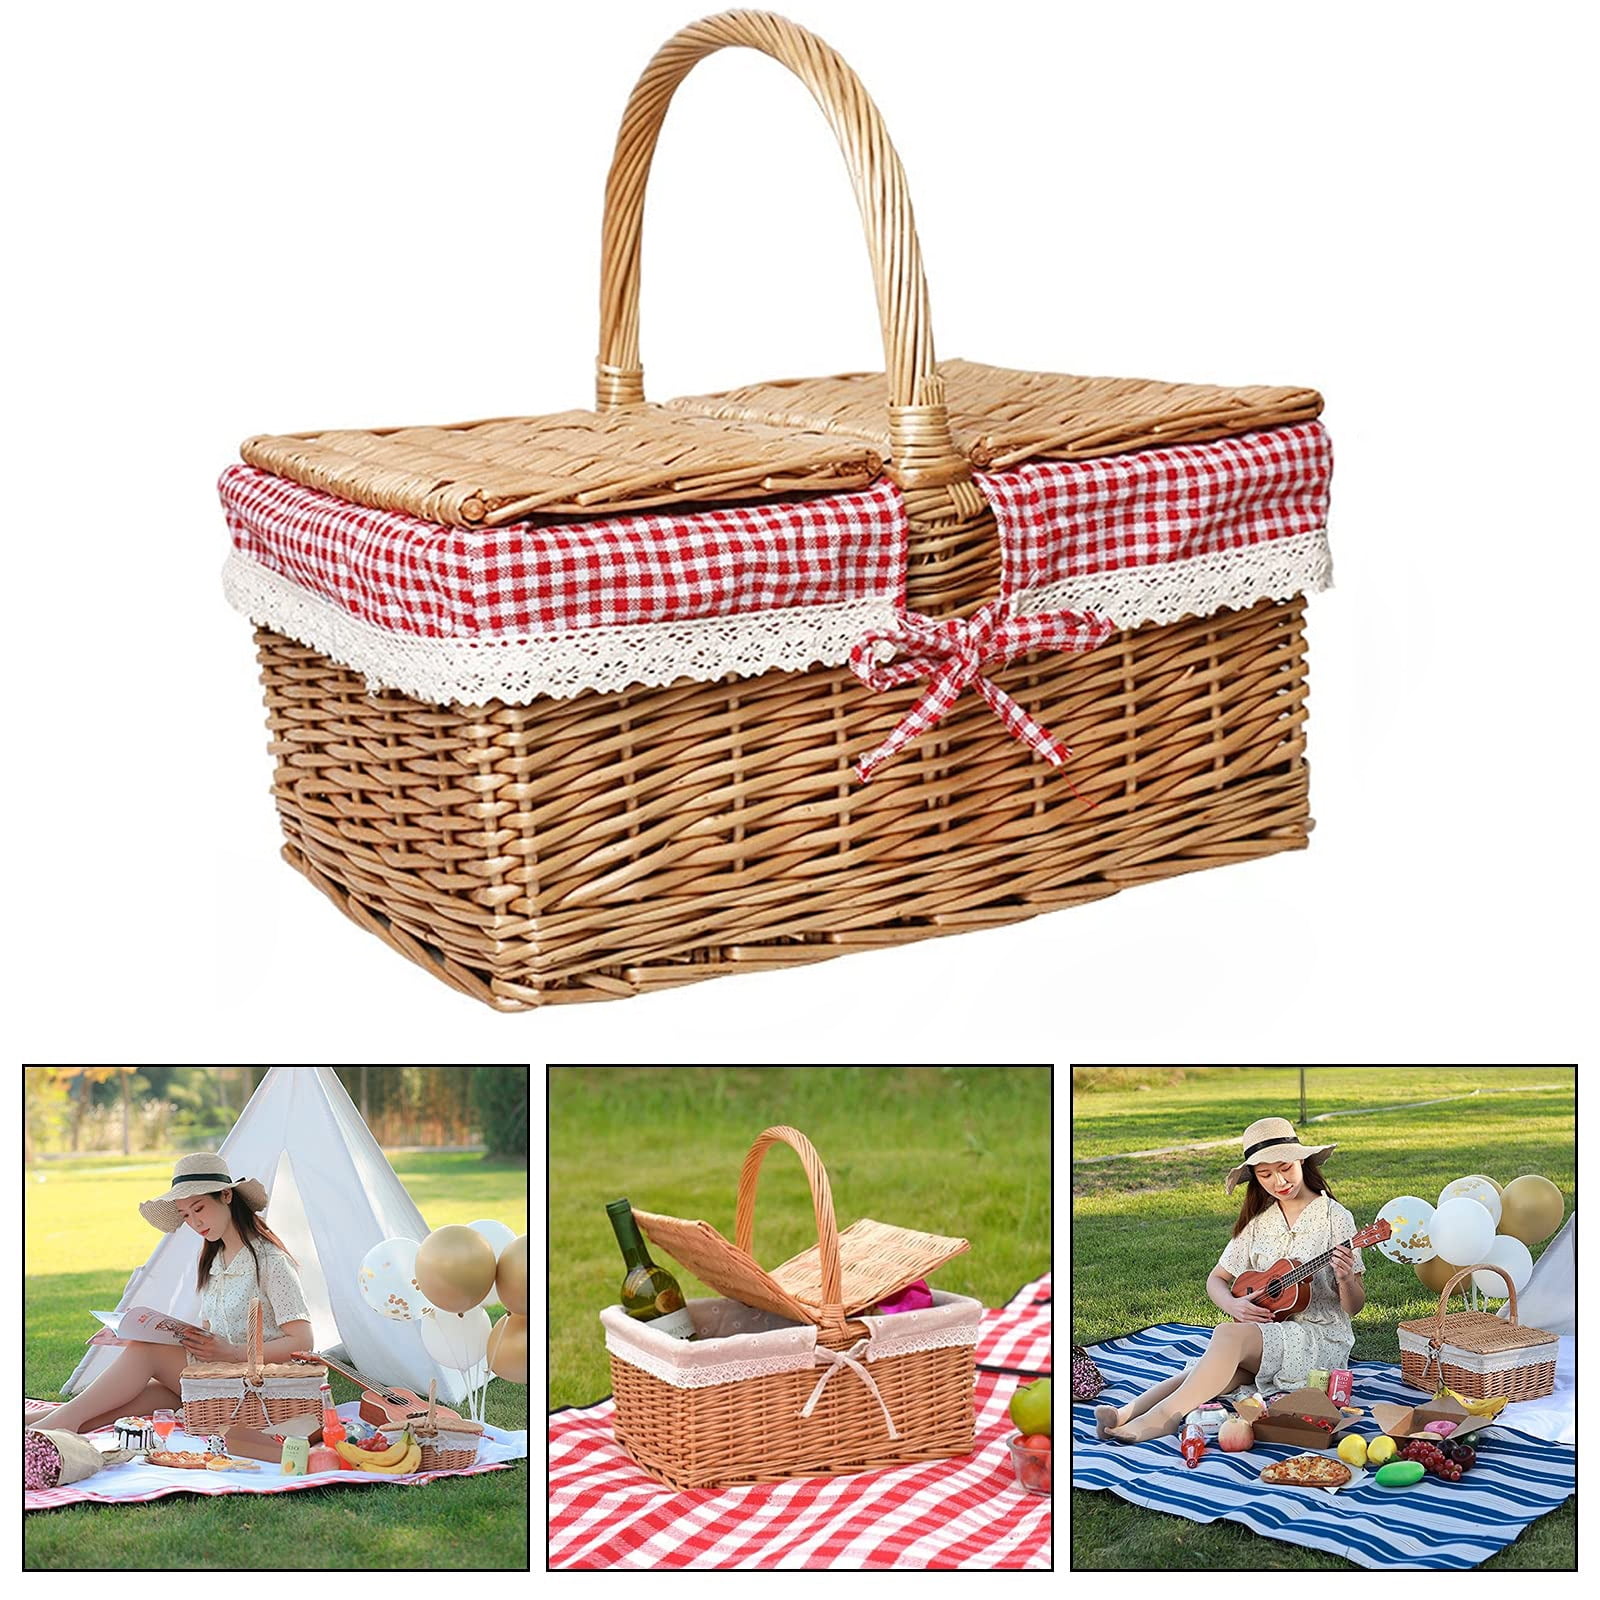 Rattan Storage Basket Natural Woven Woodchip for Picnic Camping or House Storage decor Wicker Picnic Basket 